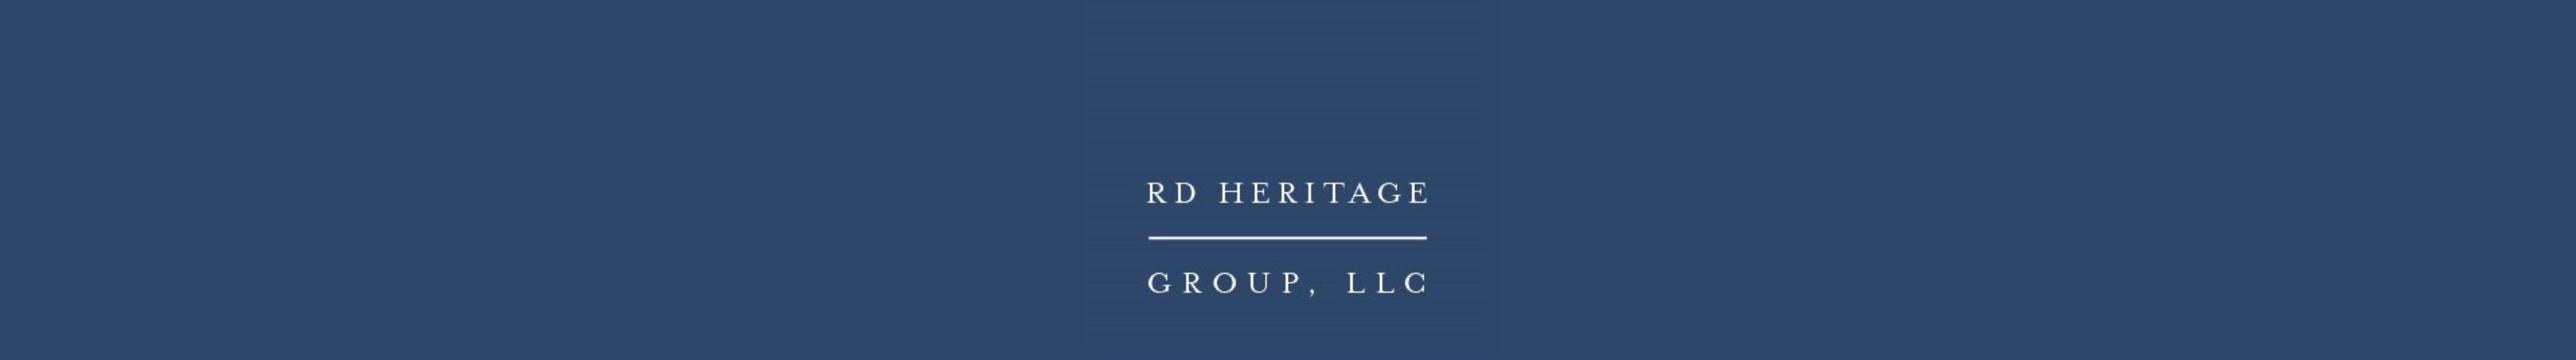 RD Heritage Group's profile banner